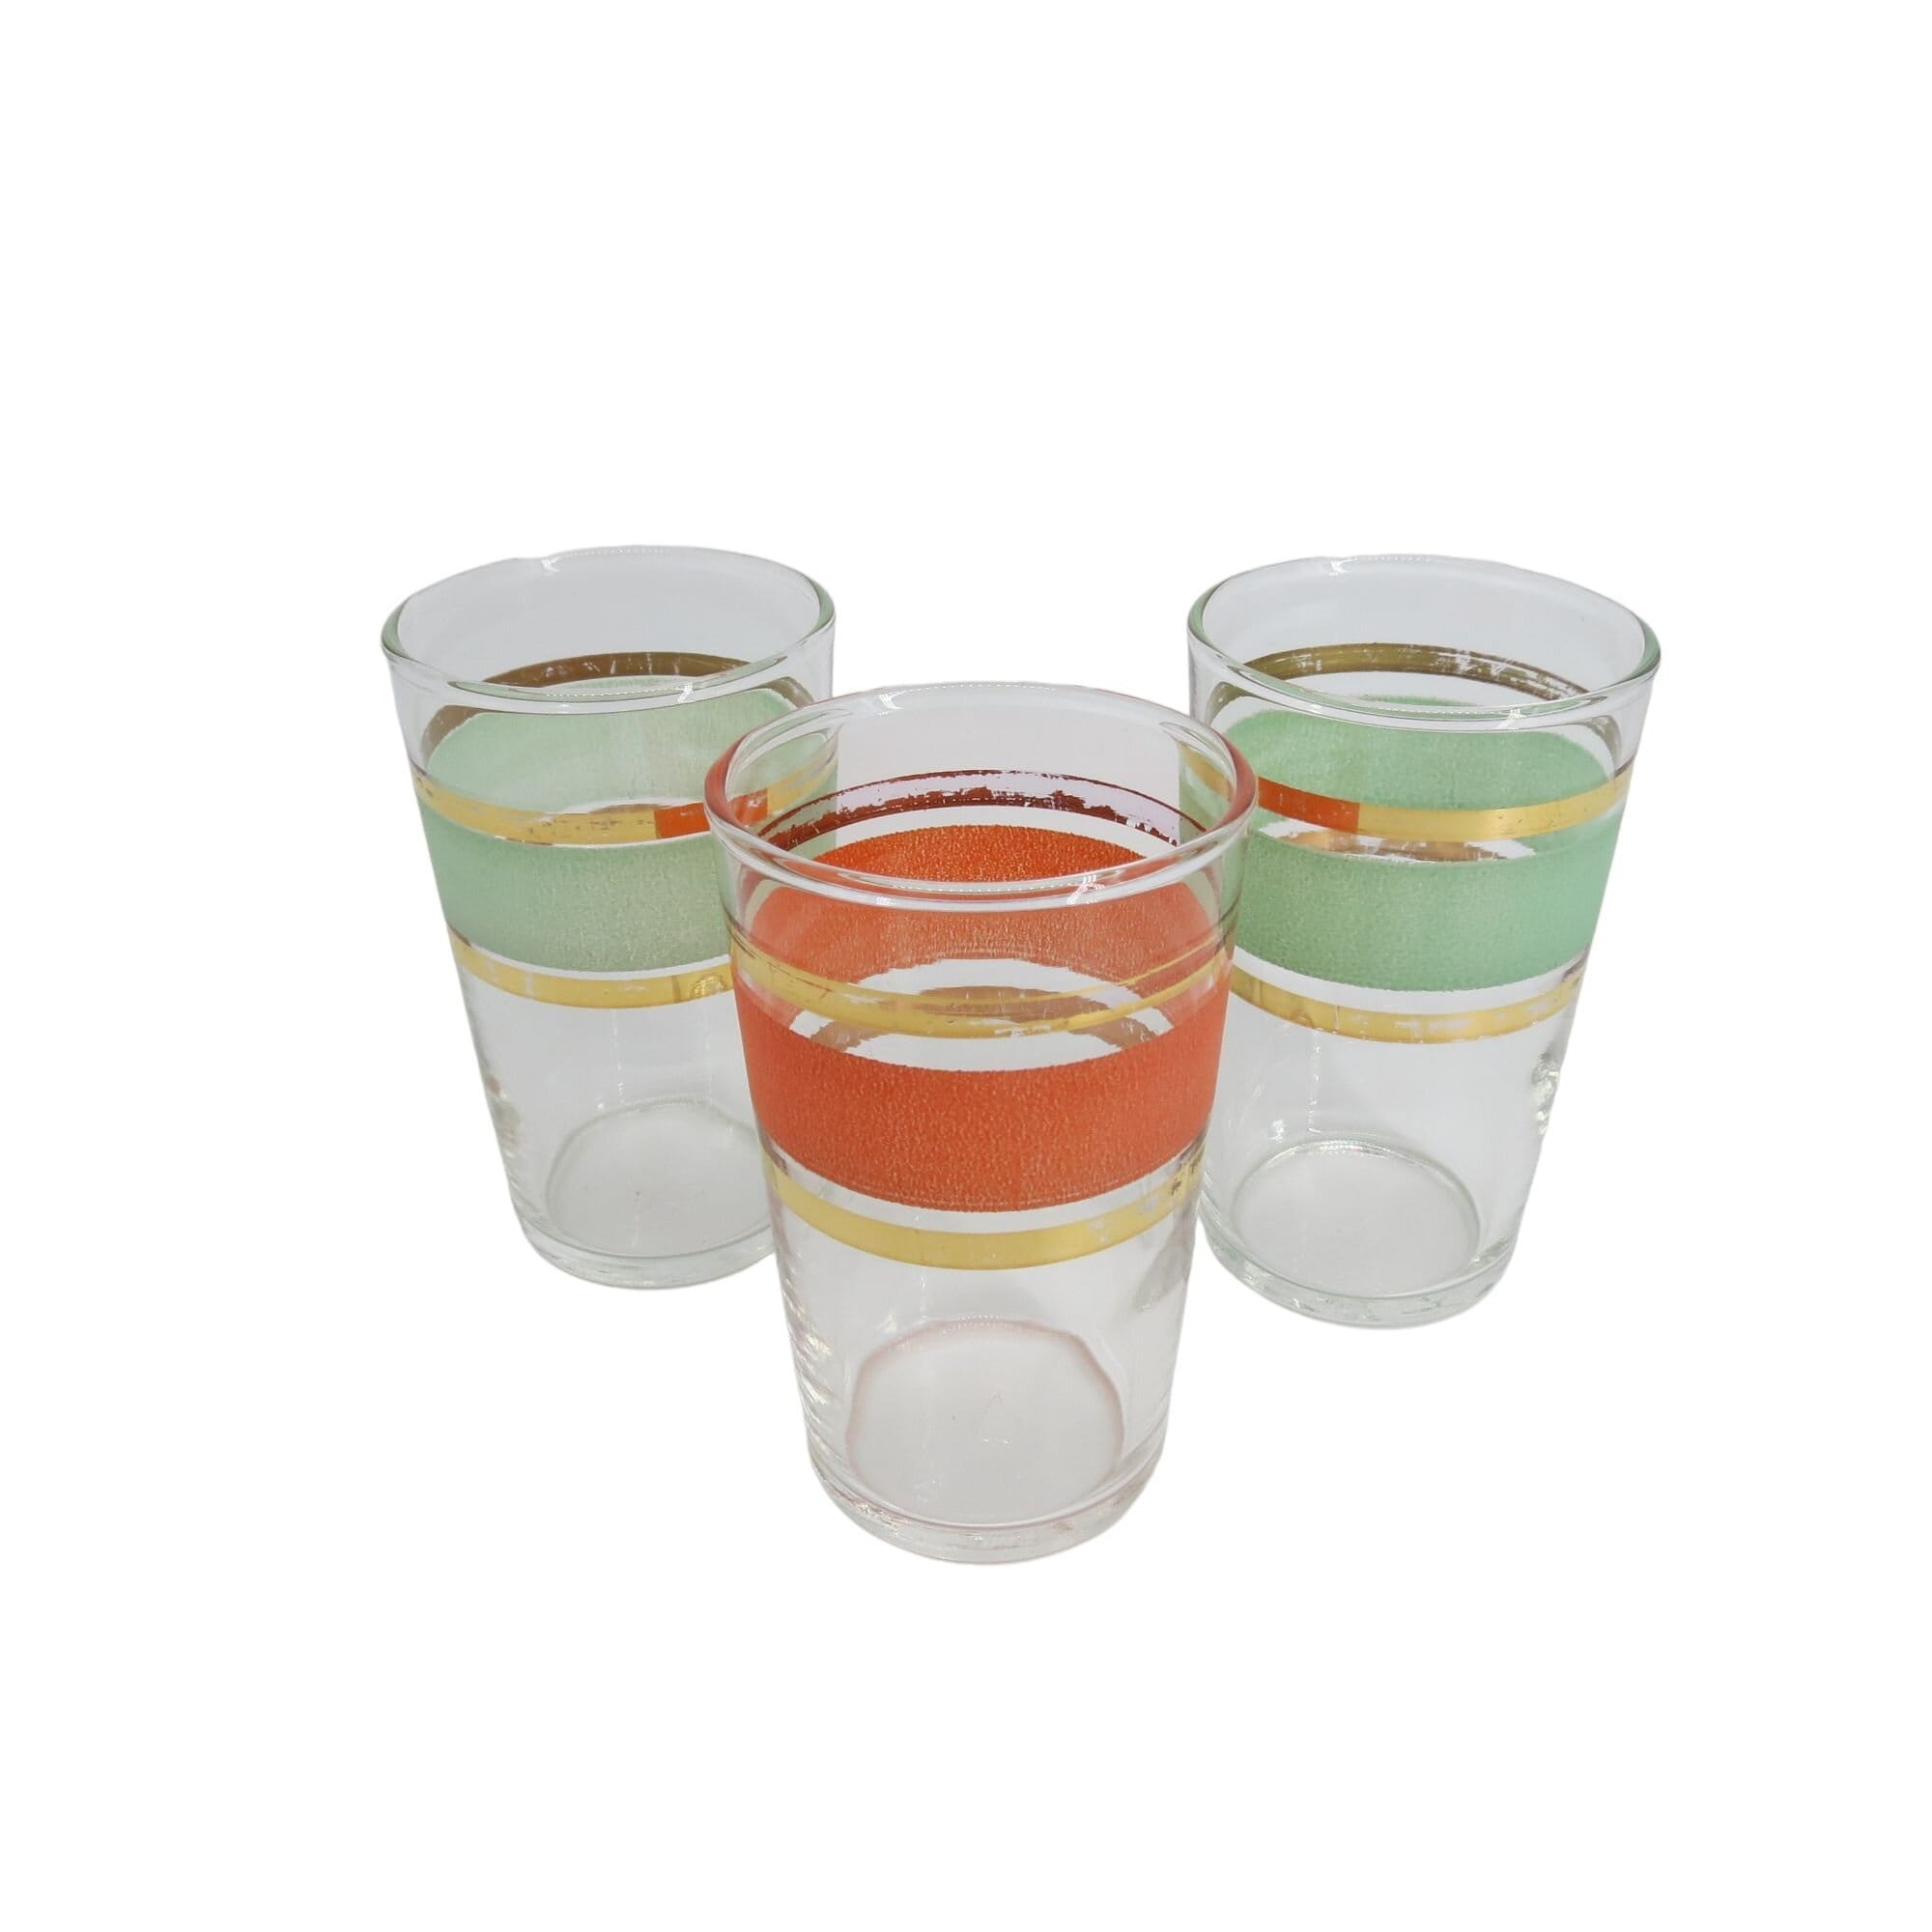 Sizikato Set of 4 Classic Vertical Stripes Clear Tumbler, 8-Ounce Drinking  Glasses for Water, Beverages, Juice